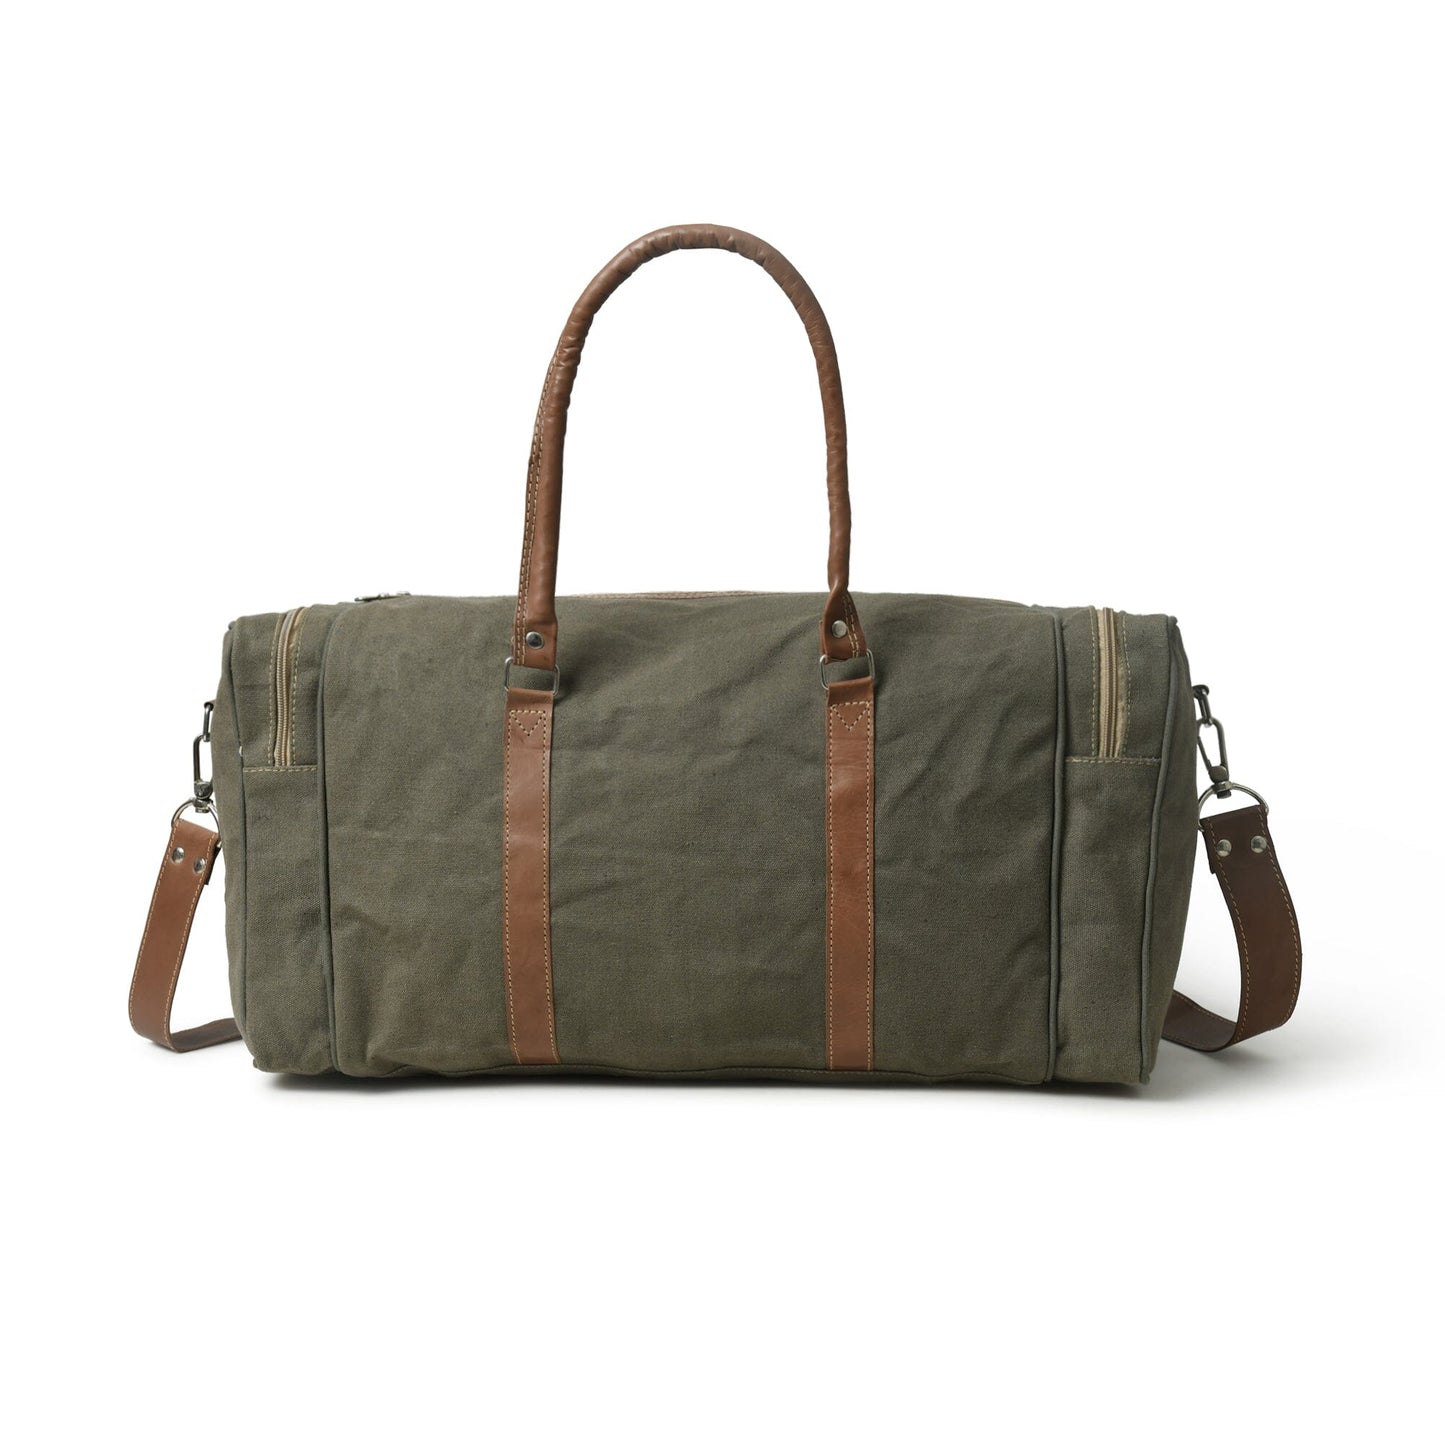 Arnold Canvas Duffle Bag - The Tool Store